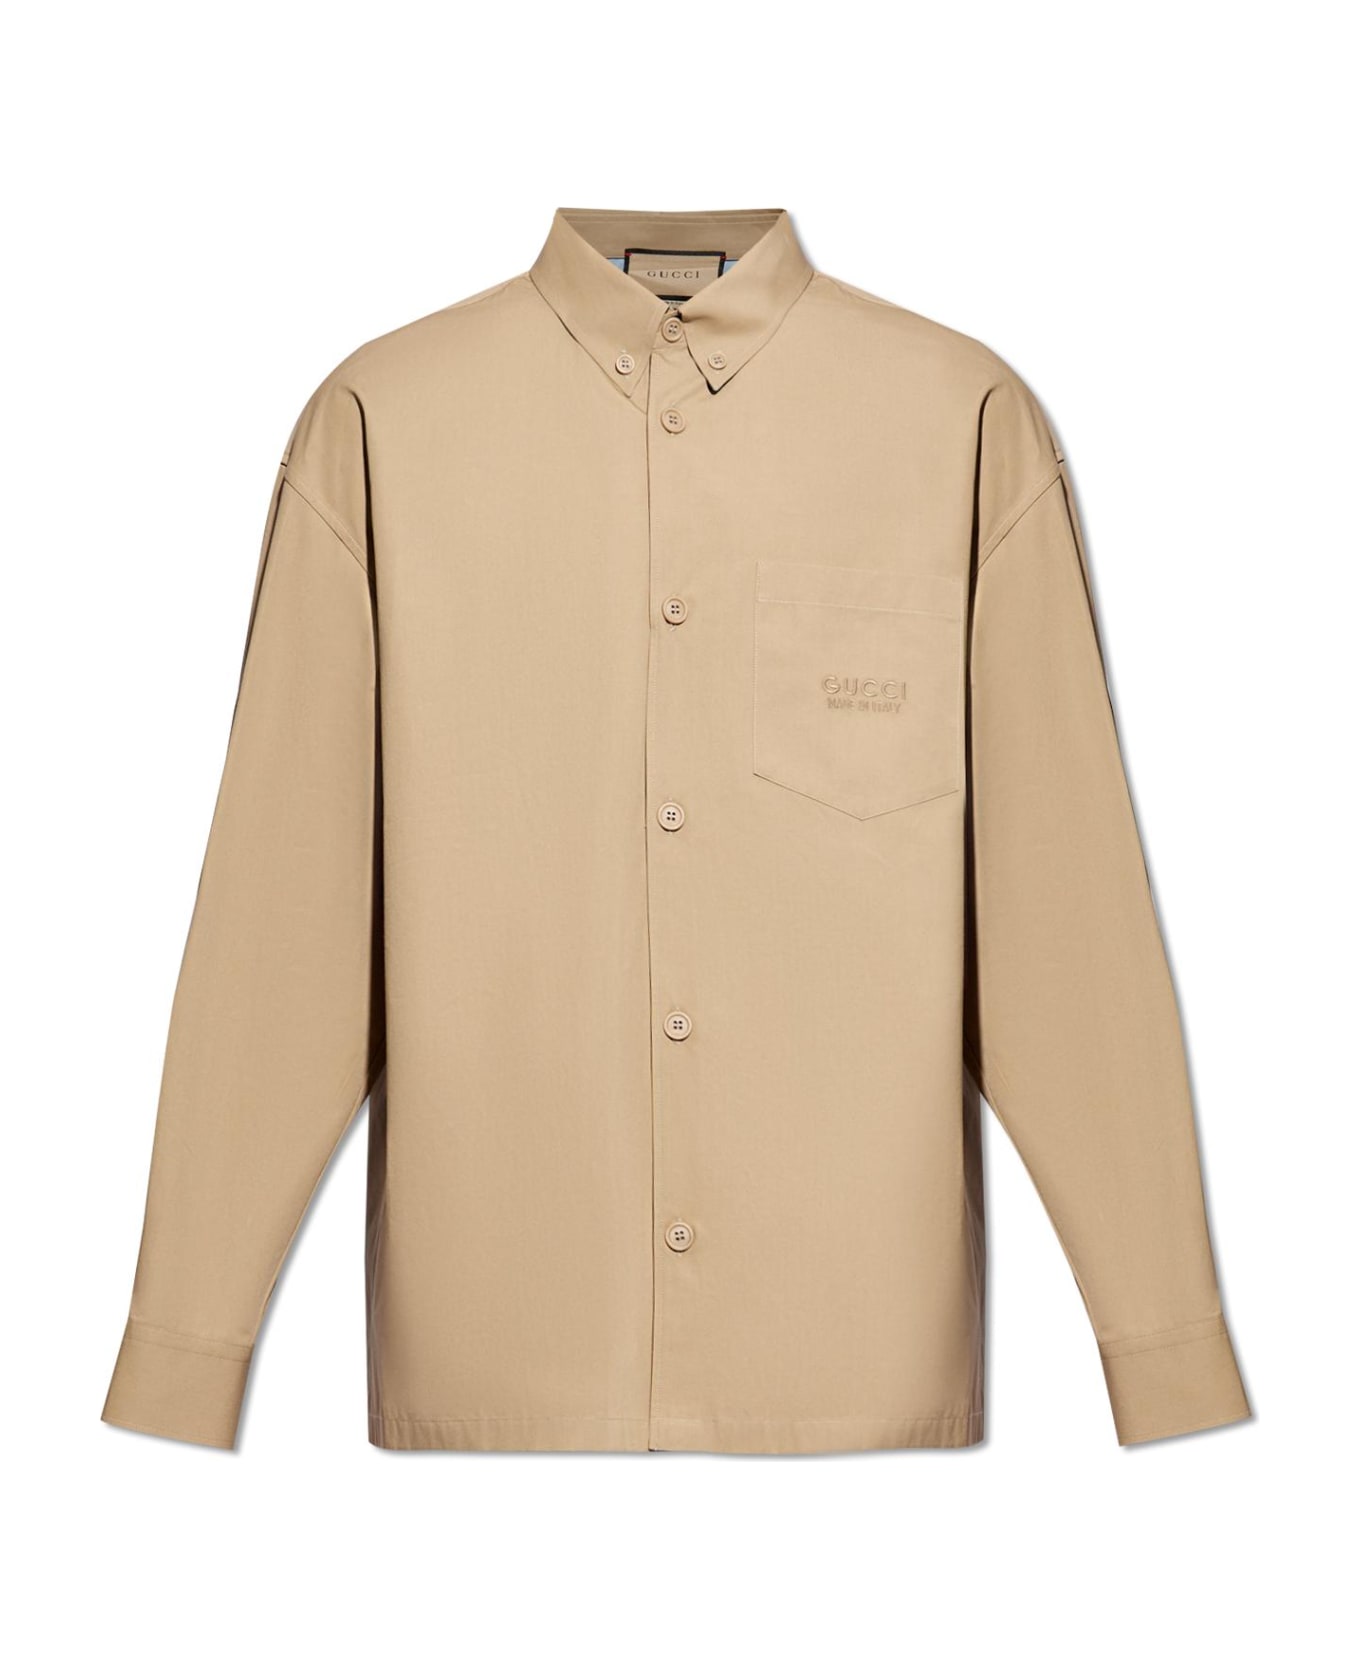 Gucci Cotton Shirt With Pocket - Beige シャツ